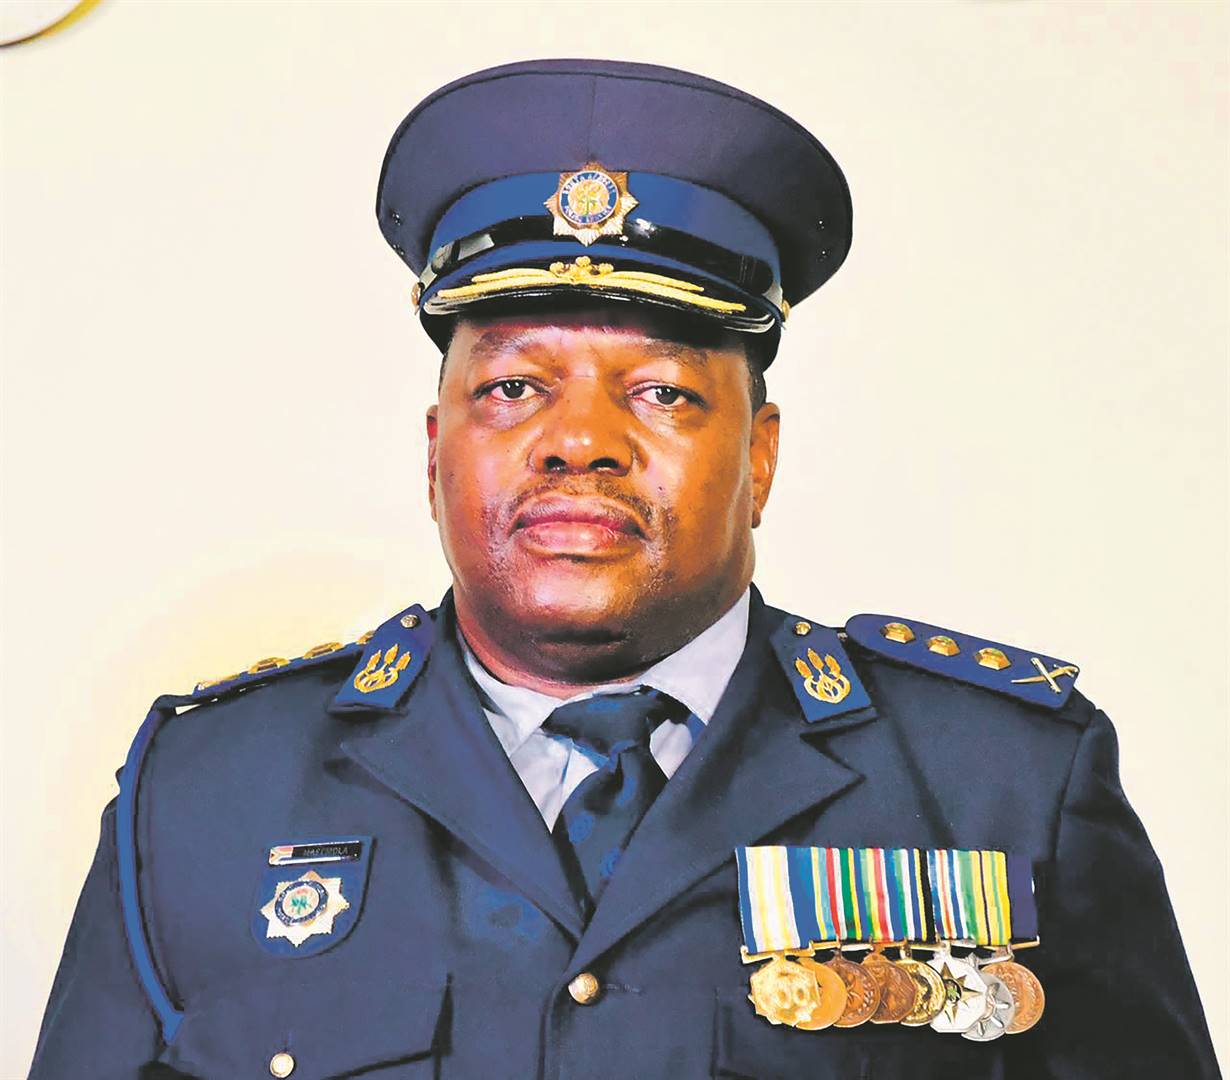 National police commissioner General Fannie Masemola has come under scrutiny in the Phala Phala matter. Photo: GCIS